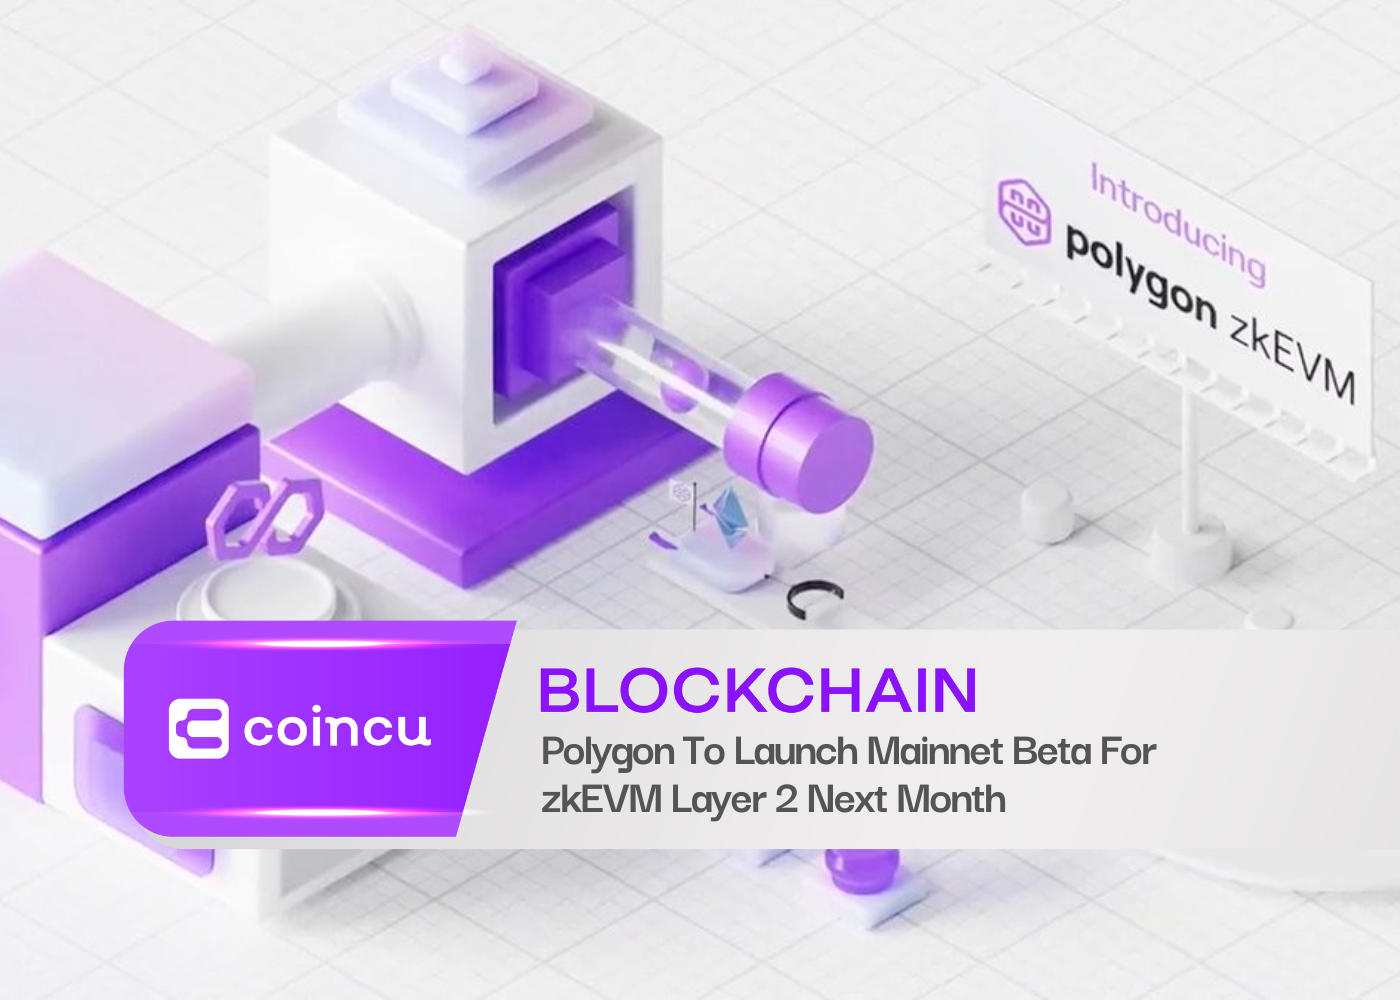 Polygon To Launch Mainnet Beta For zkEVM Layer 2 Next Month